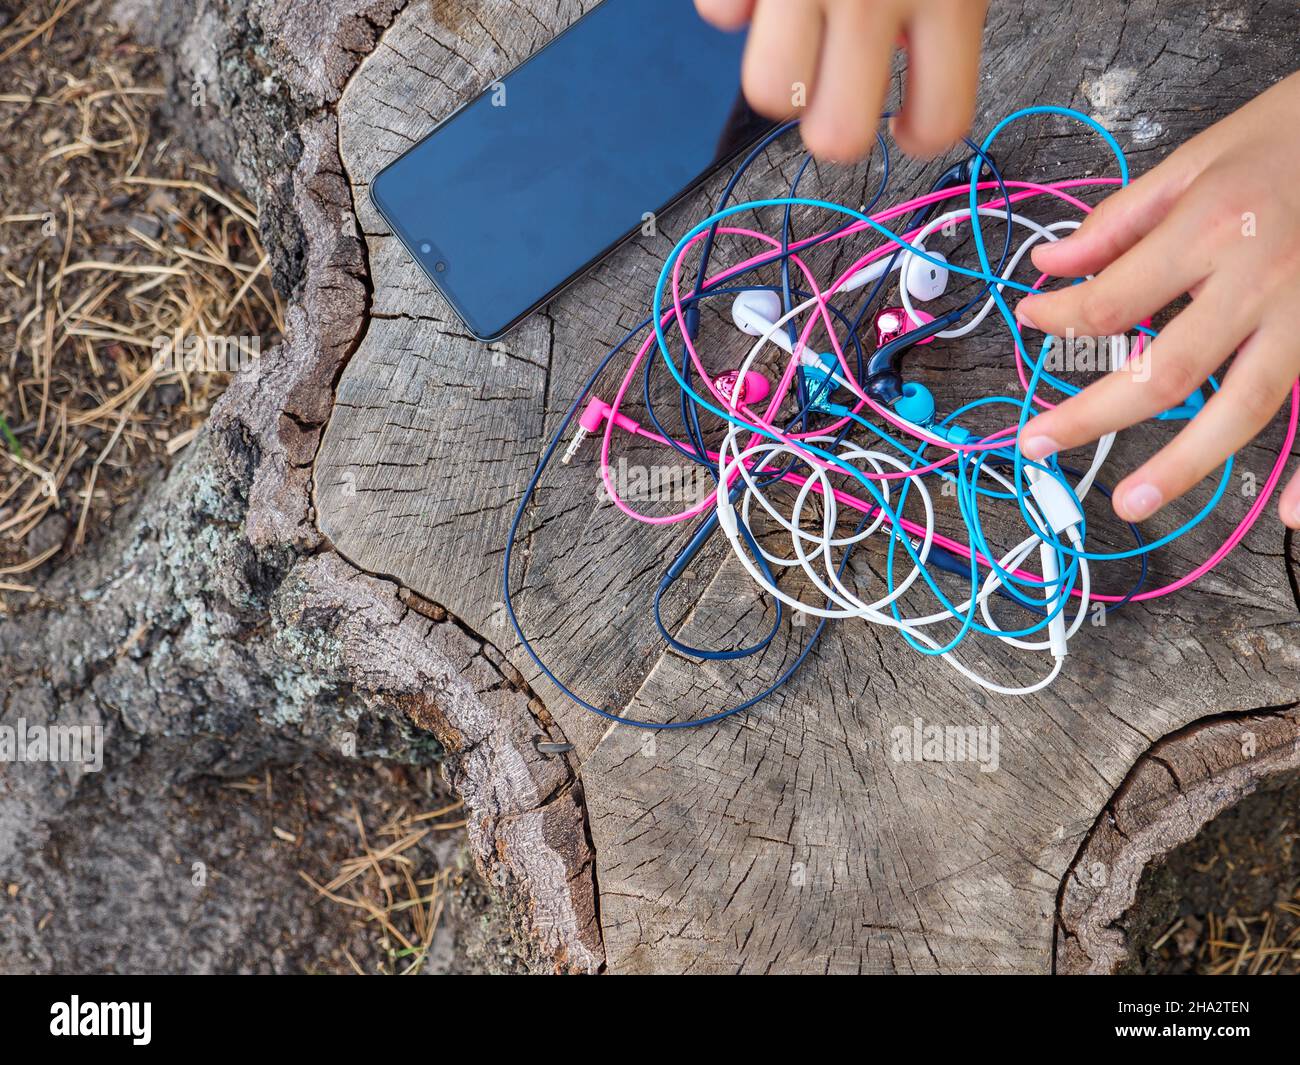 A phone and a hand holding a knot of four pairs of in-ear wired colorful pink, blue, white, and black earbuds tangled in a messy chaotic problem. Stock Photo